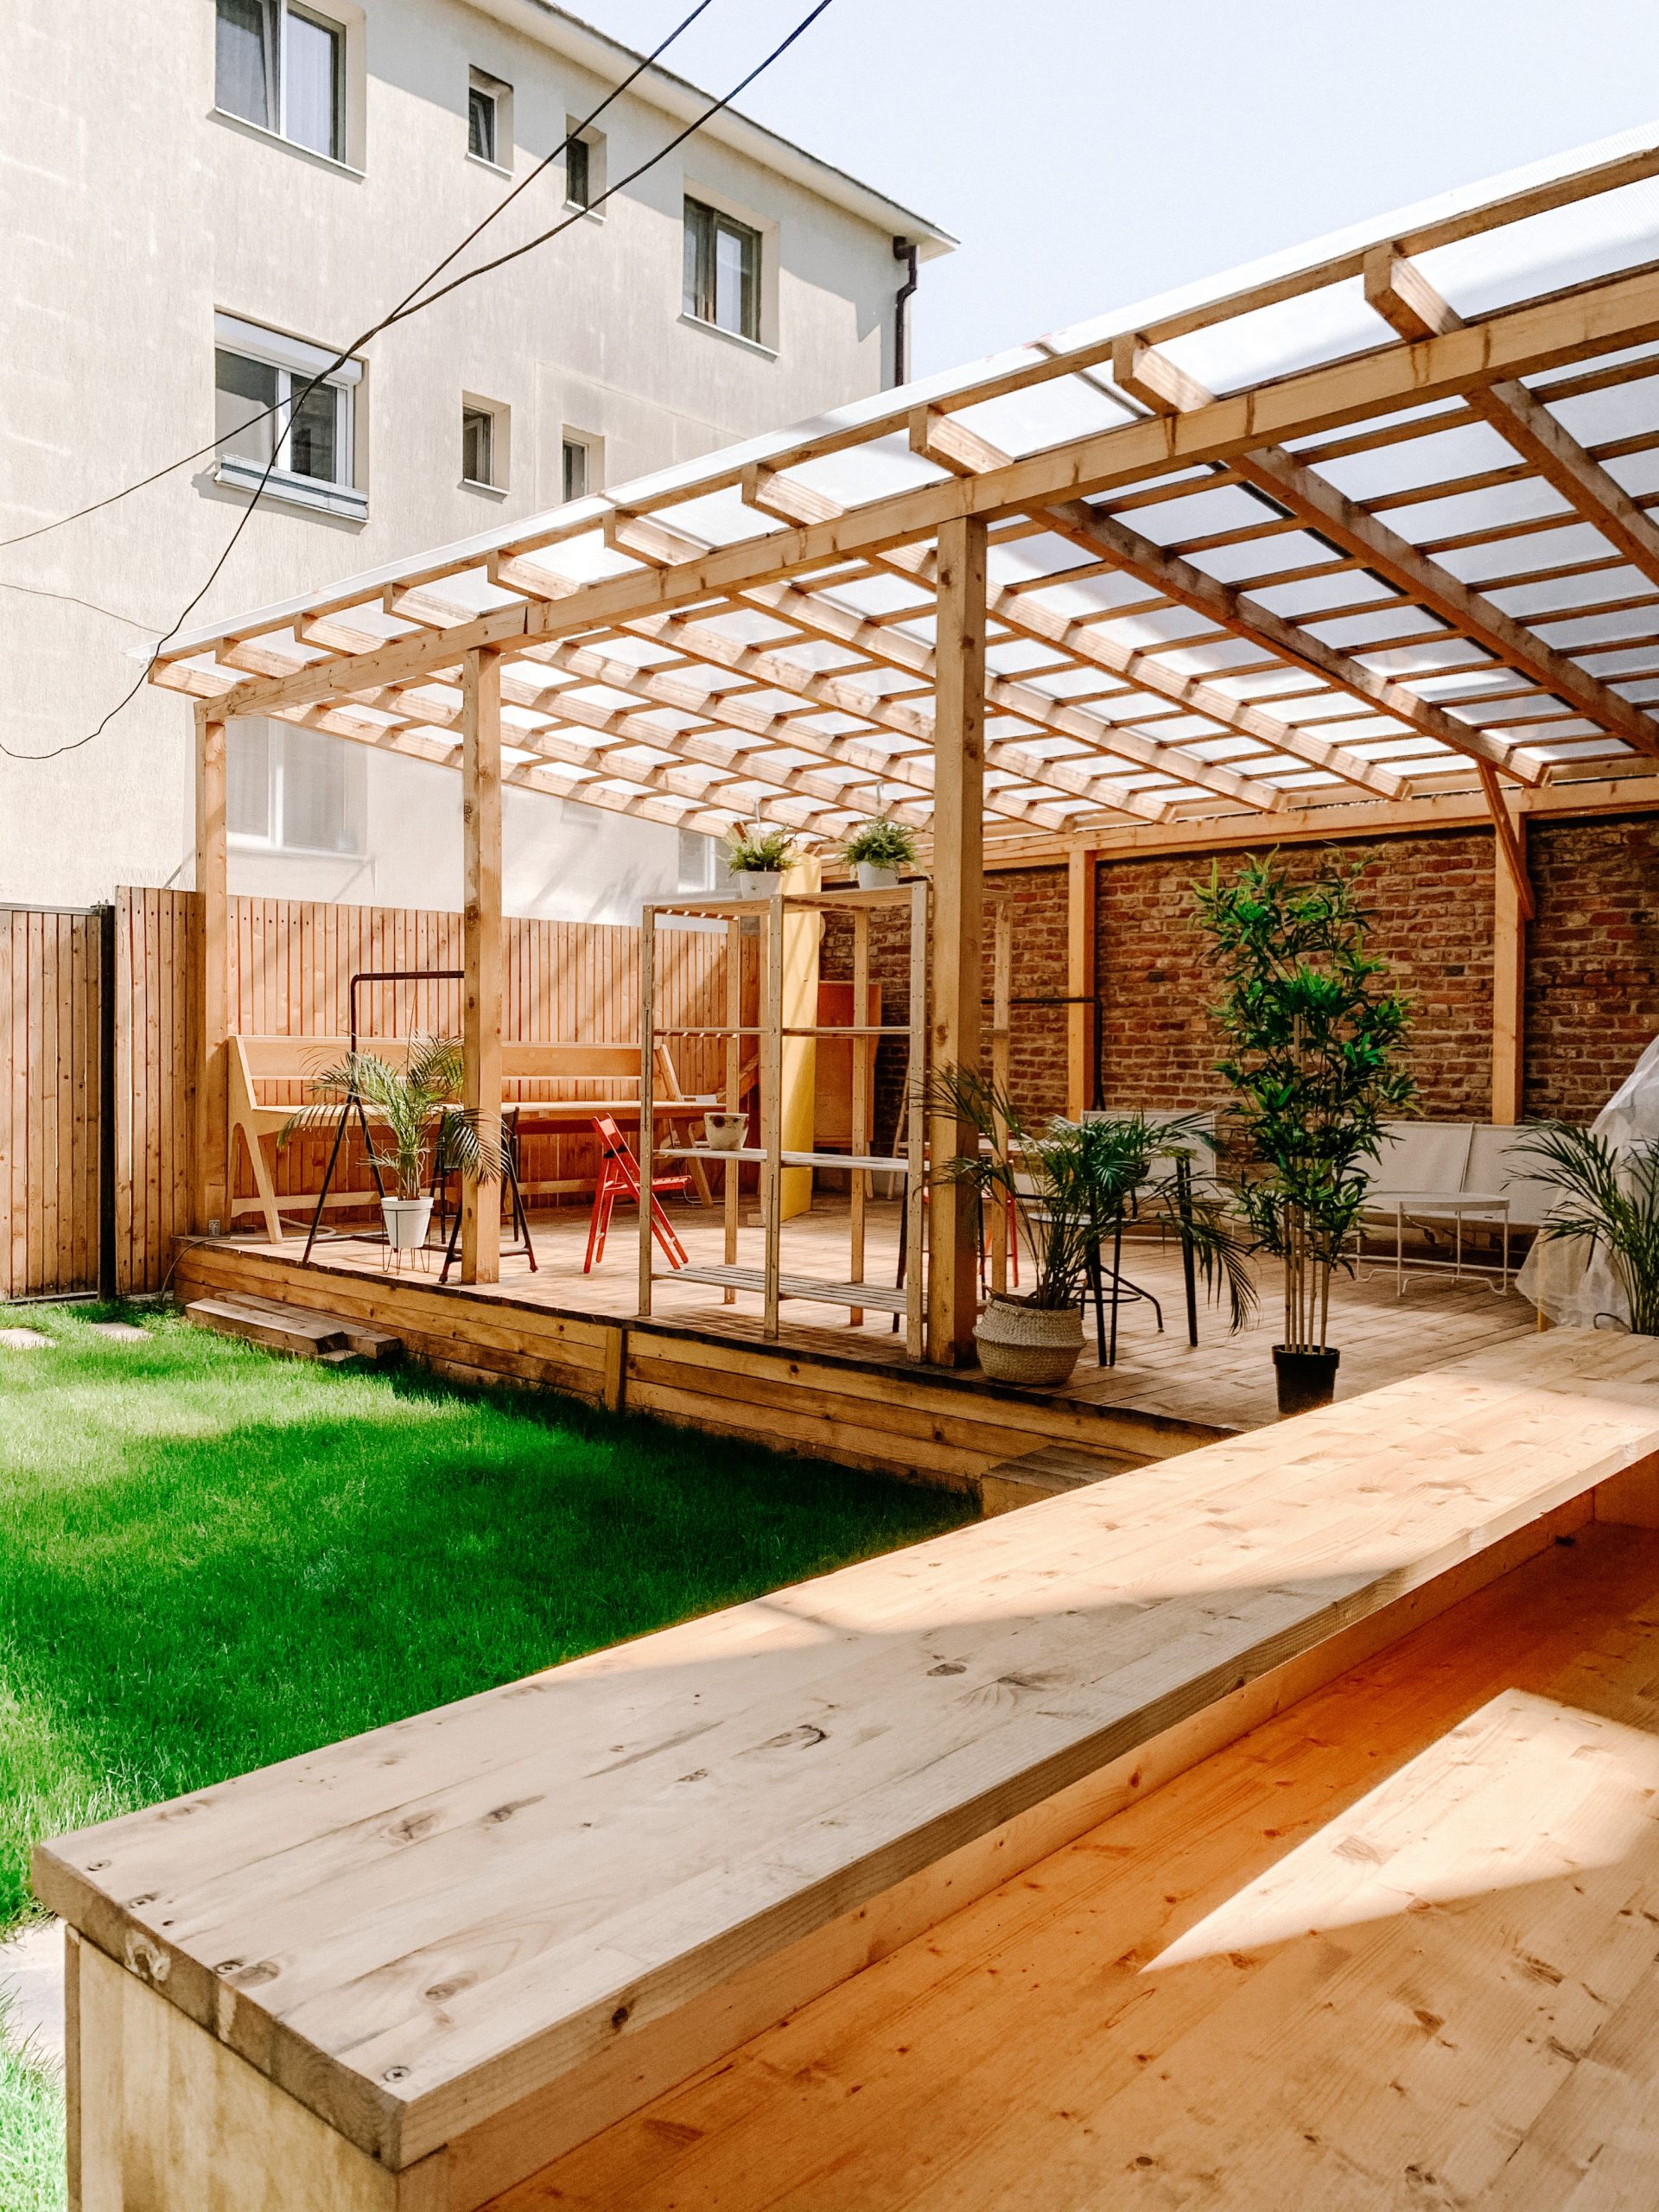 Top Tips for a Seamless Indoor/Outdoor Living Space